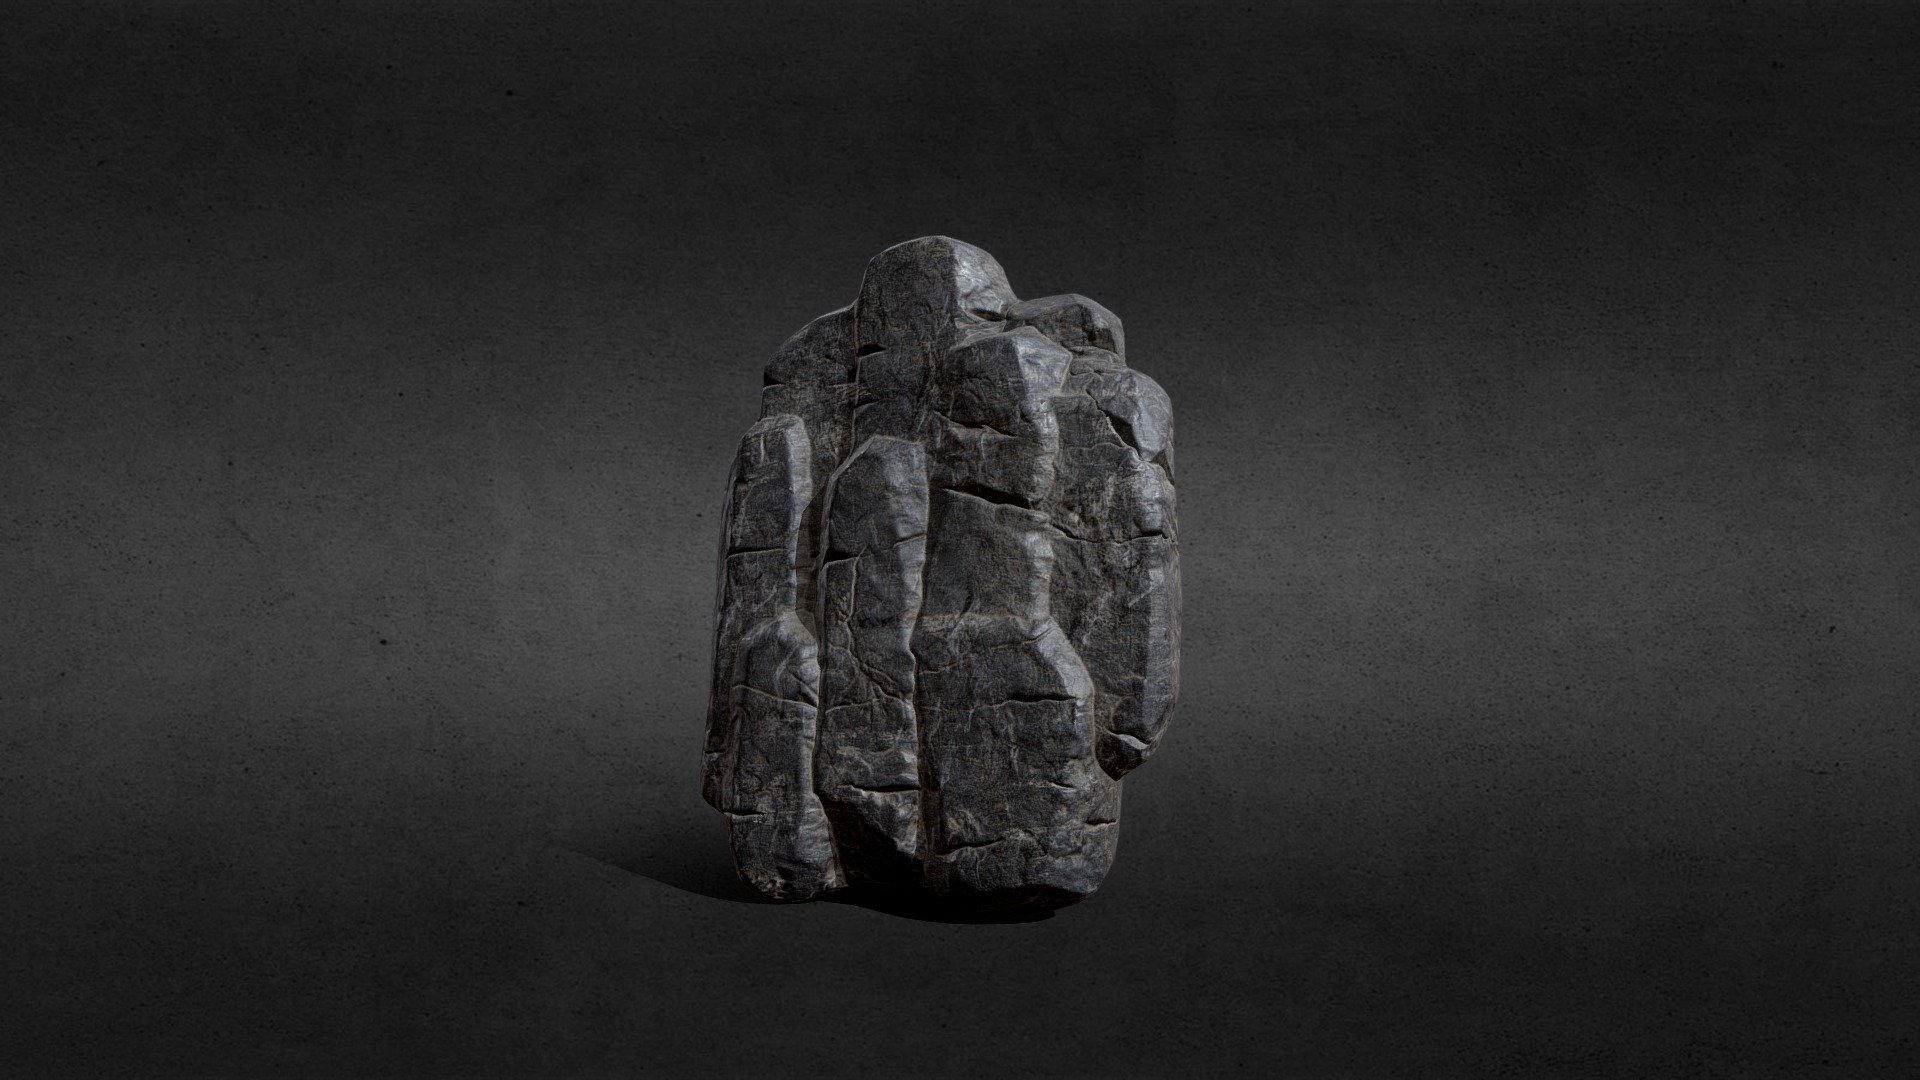 low poly rock wall

my first rock model in 3dcoat.
i can recommend the software to anyone. 
this model only took me 1hour from start to finish.
its incredibly fast and easy to learn.

the high, low, the uv mapping and baking where all done in 3dcoat.
except the textures, i did them in substance painter with a smart material as i dont have enough understanding of the texturing workflow in 3dcoat yet - Rockwall - Download Free 3D model by DJMaesen (@bumstrum) 3d model